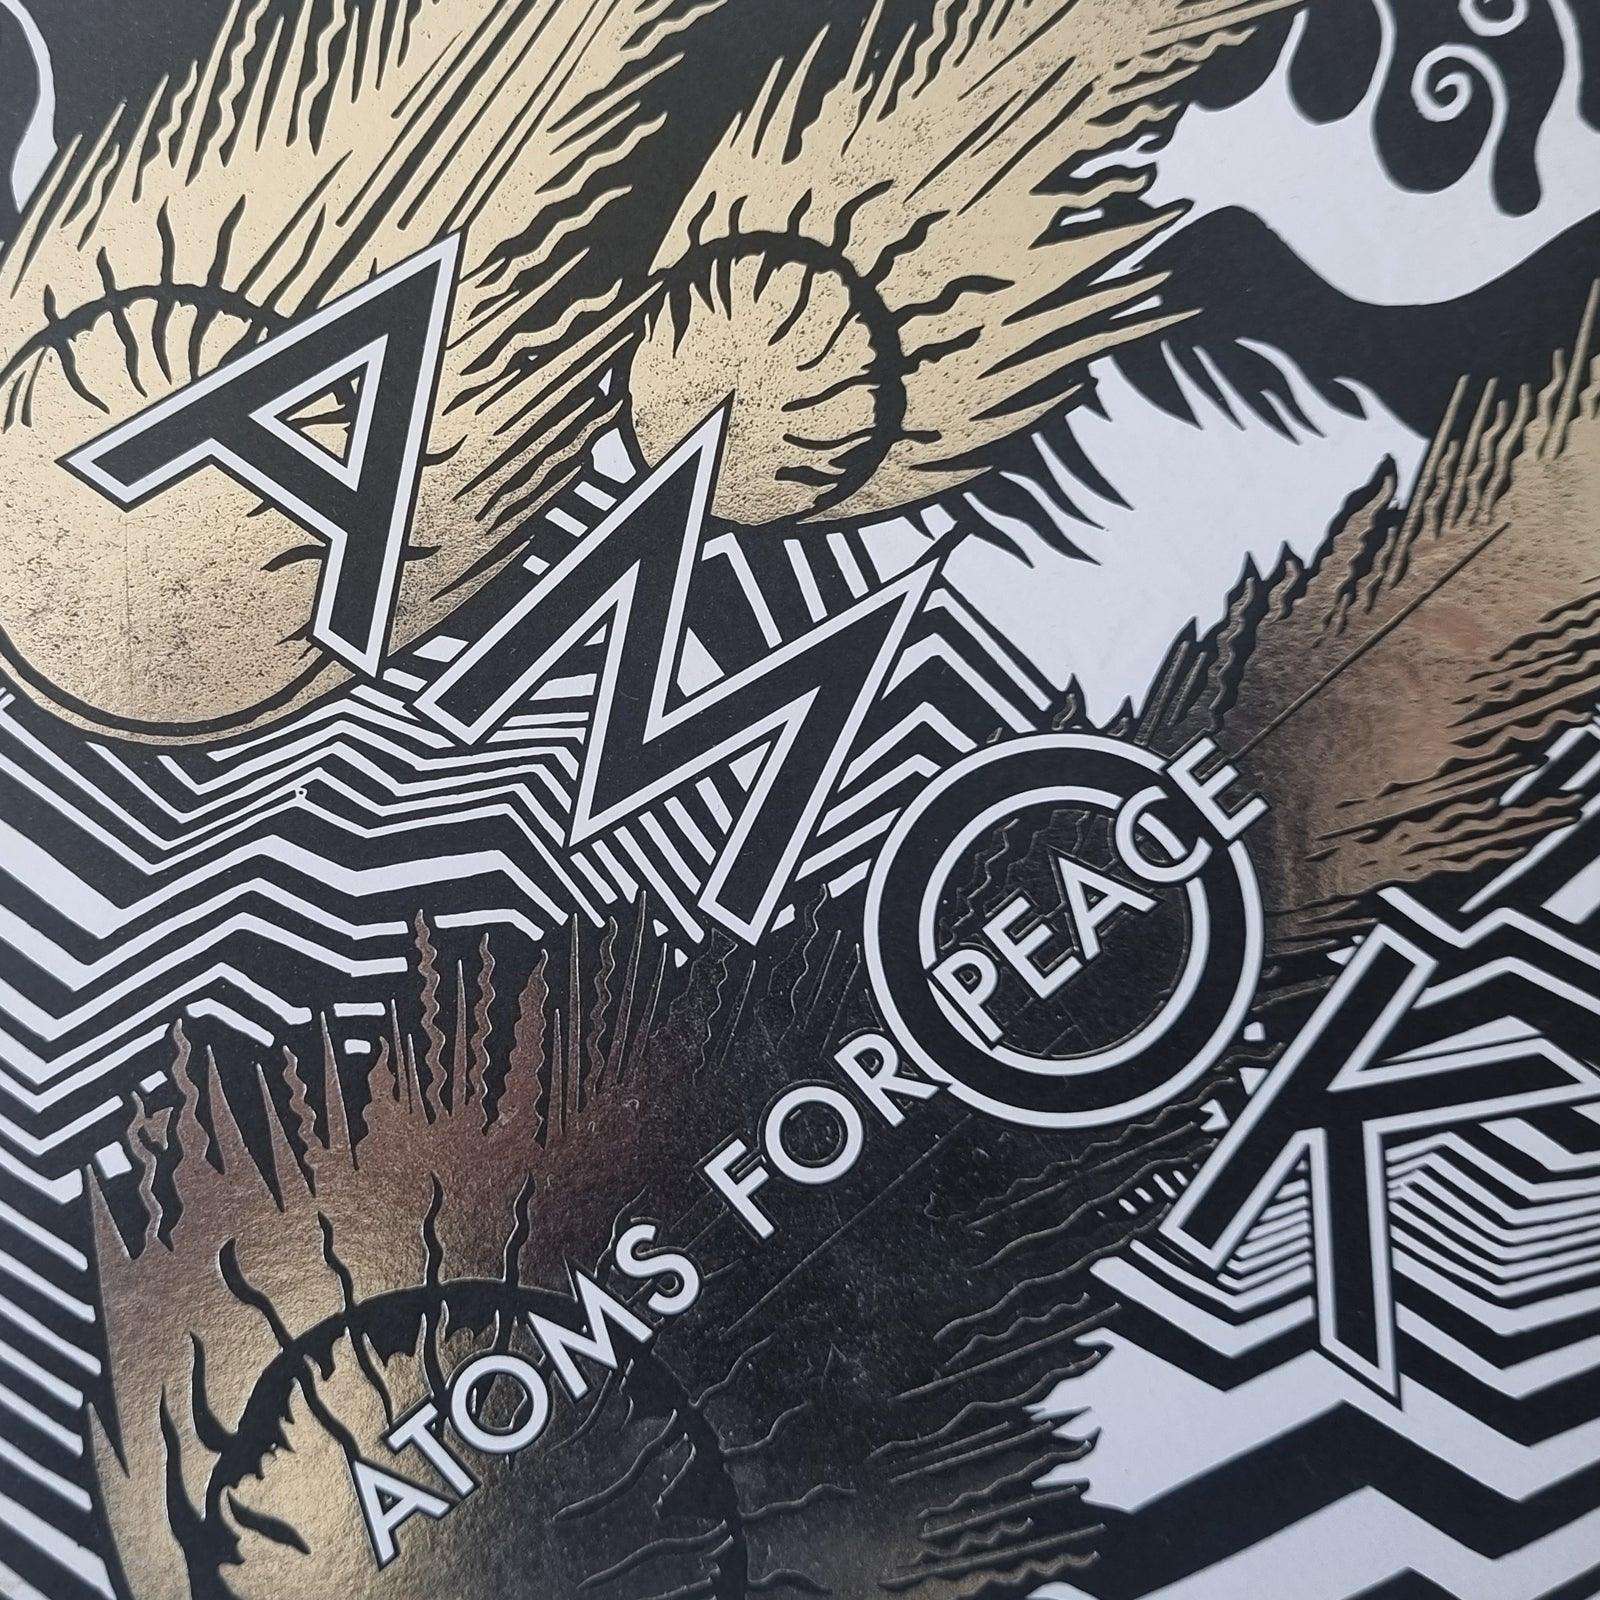 Atoms for Peace - Amok (CD)